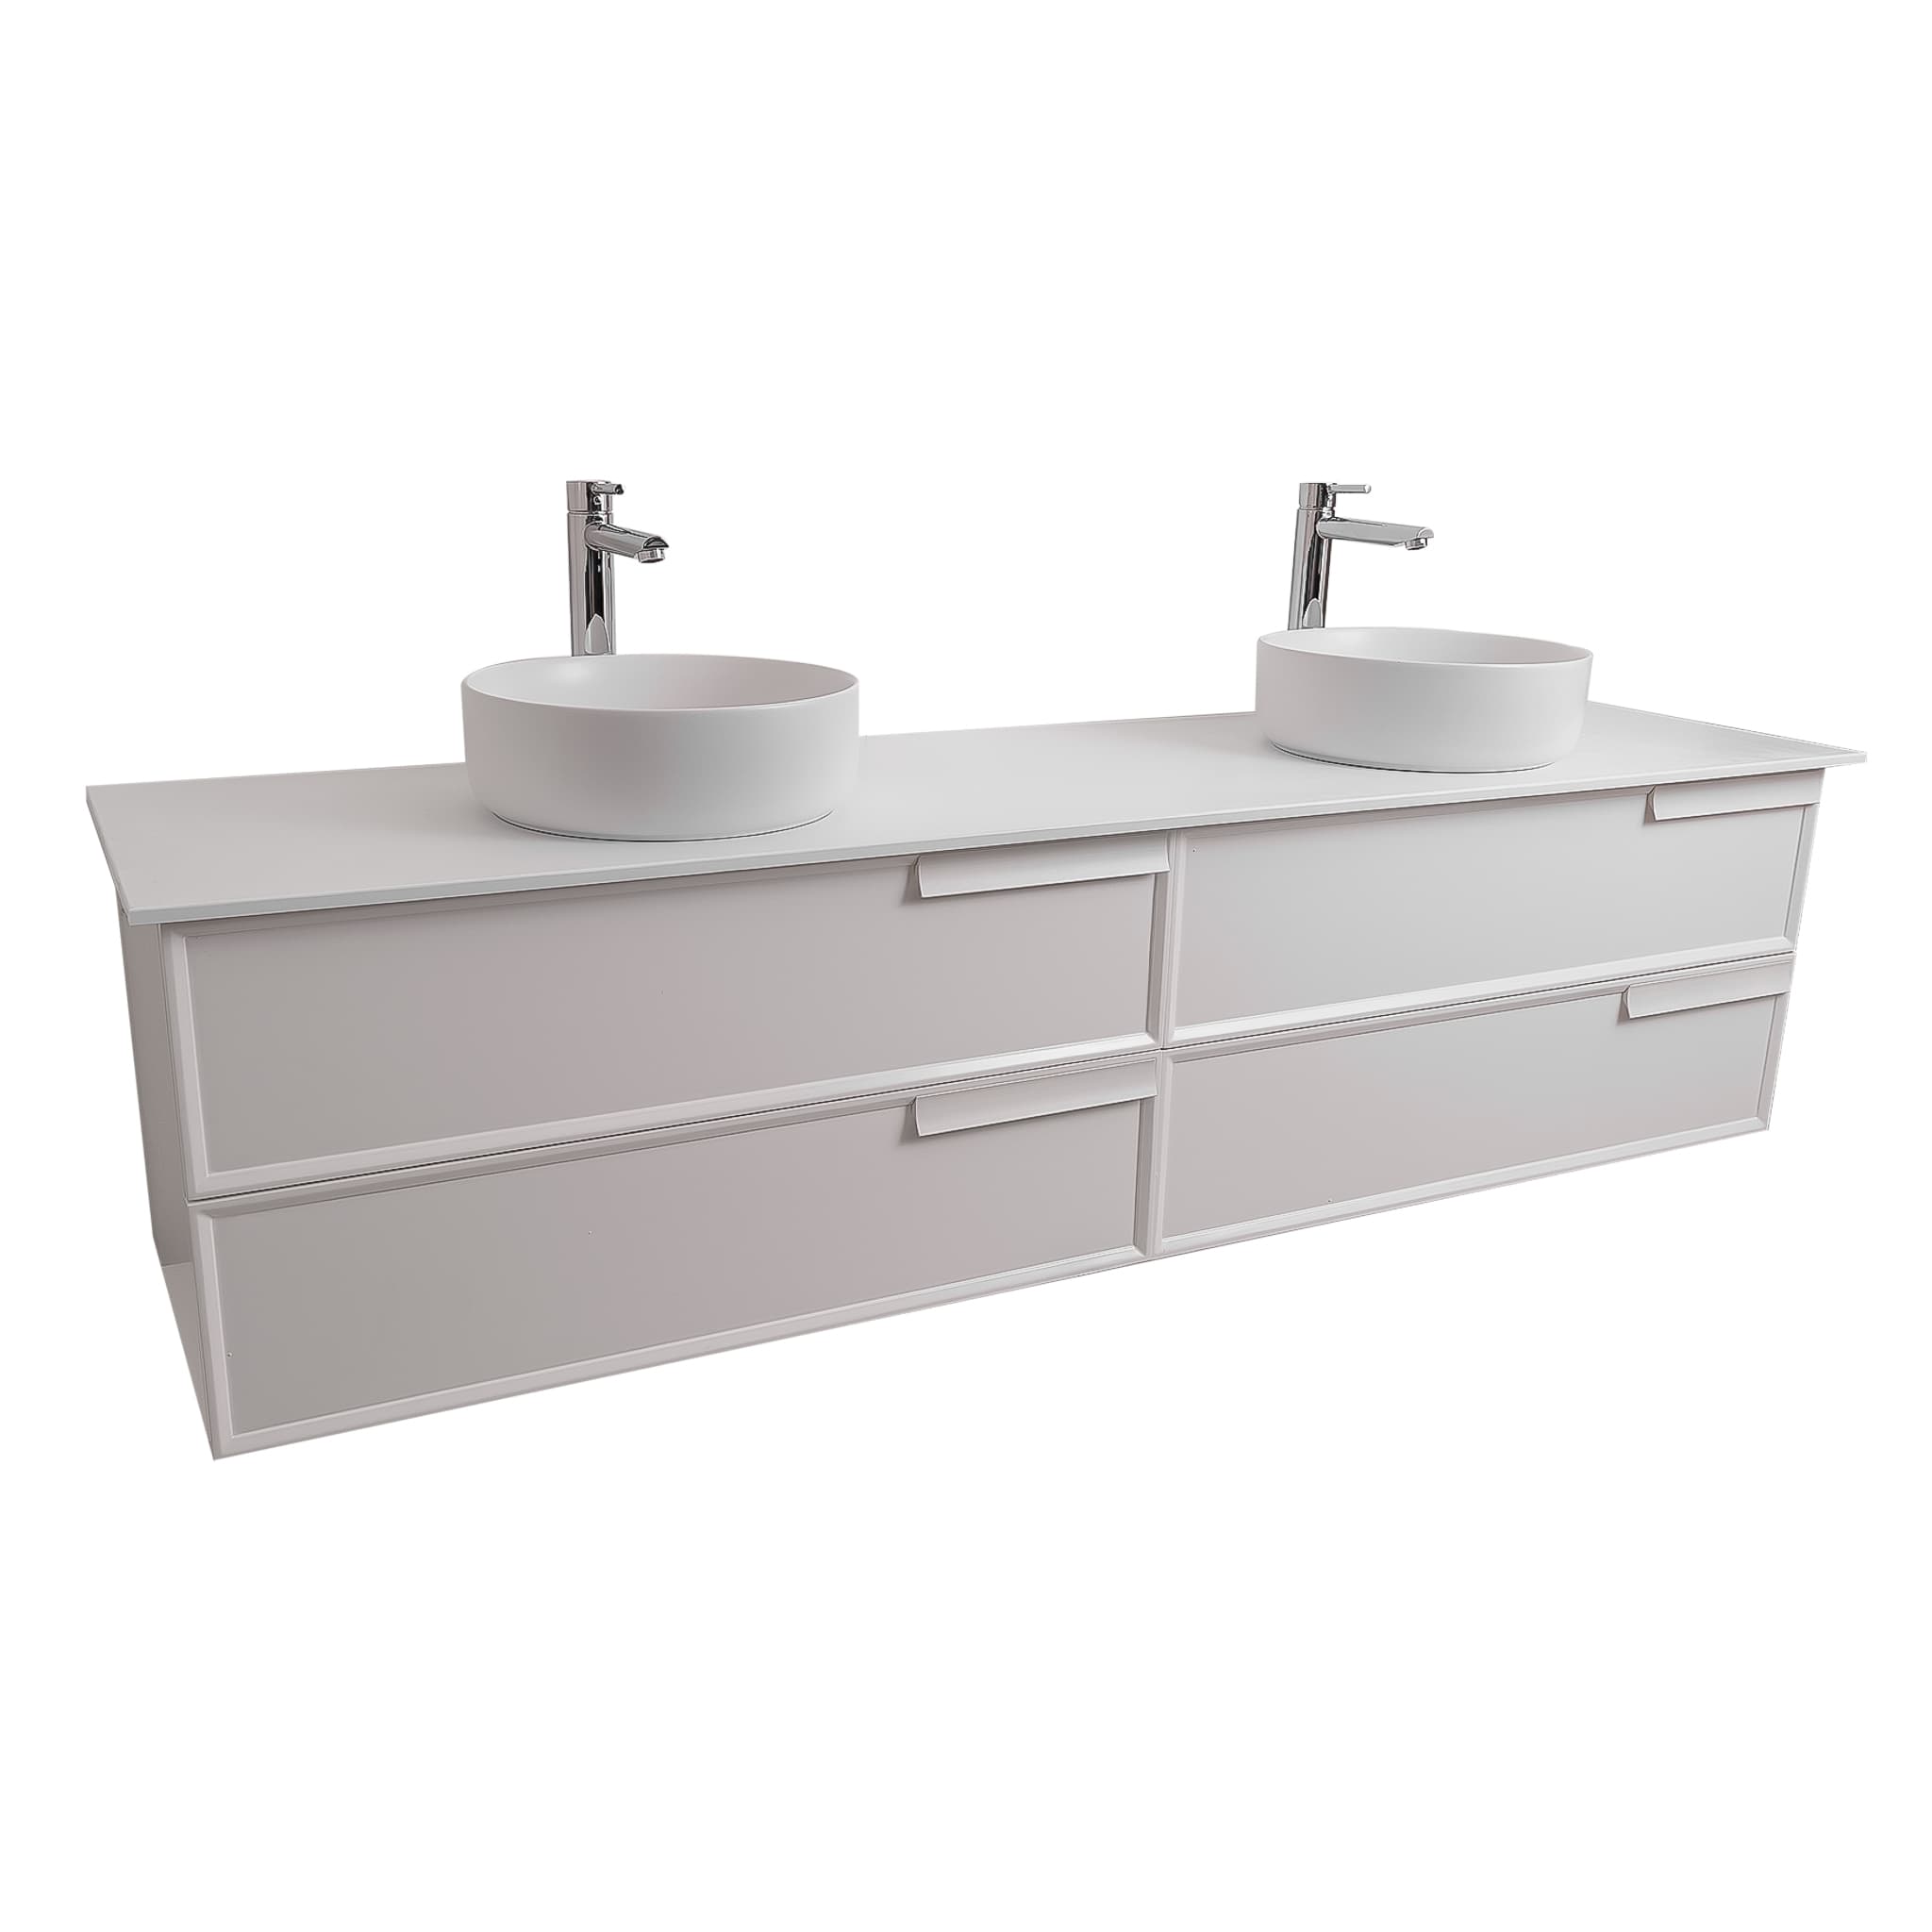 Garda 72 Matte White Cabinet, Ares White Top and Two Ares White Ceramic Basin, Wall Mounted Modern Vanity Set